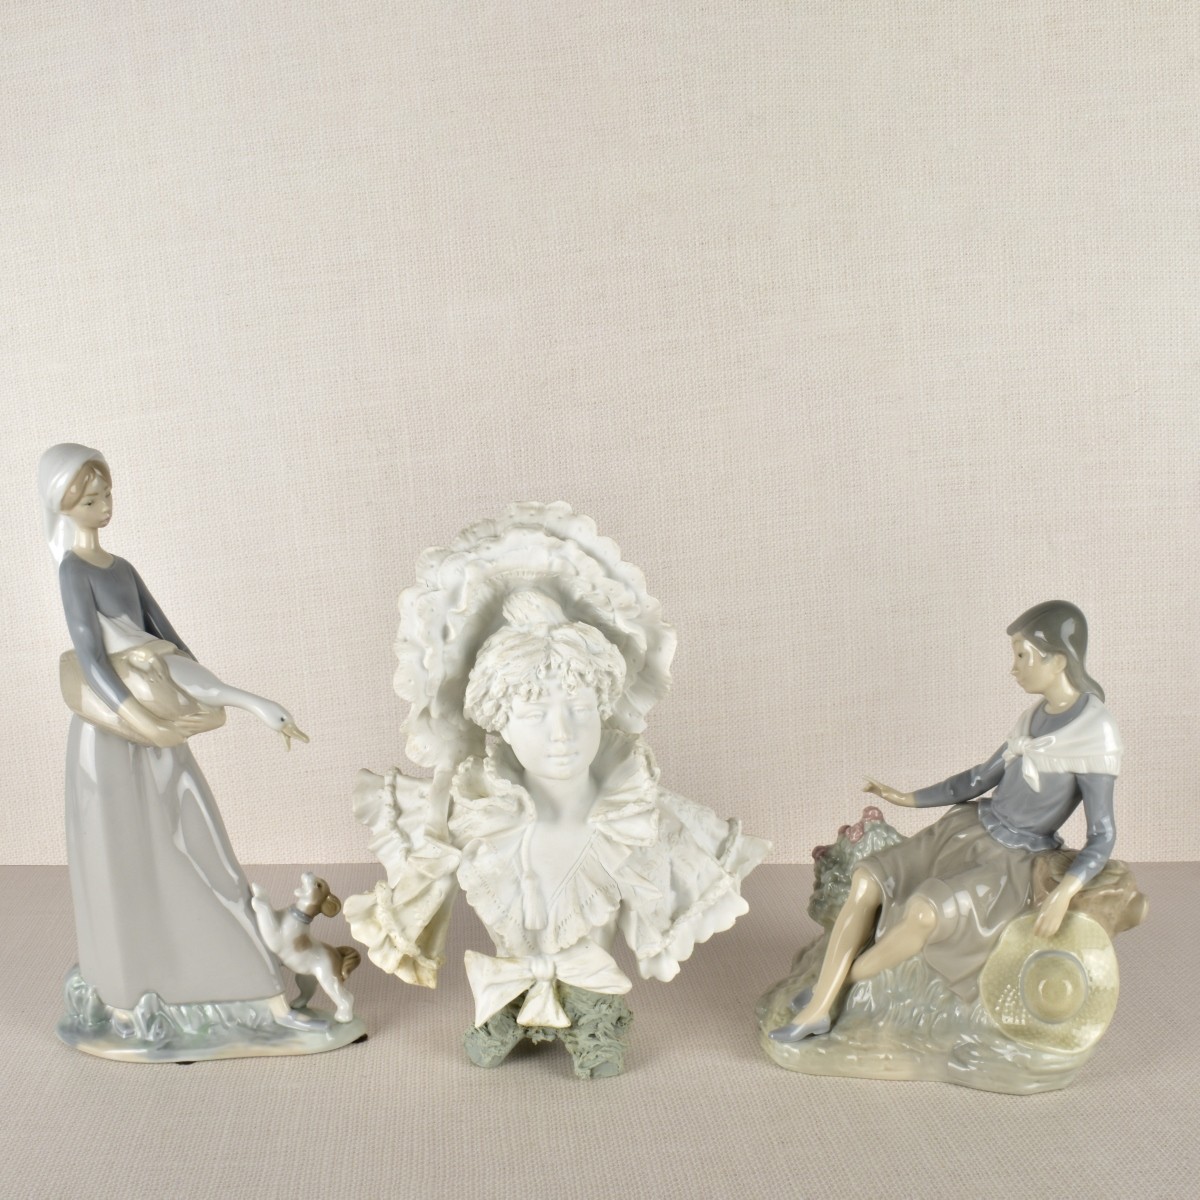 Three Statues Porcelain and Bisque